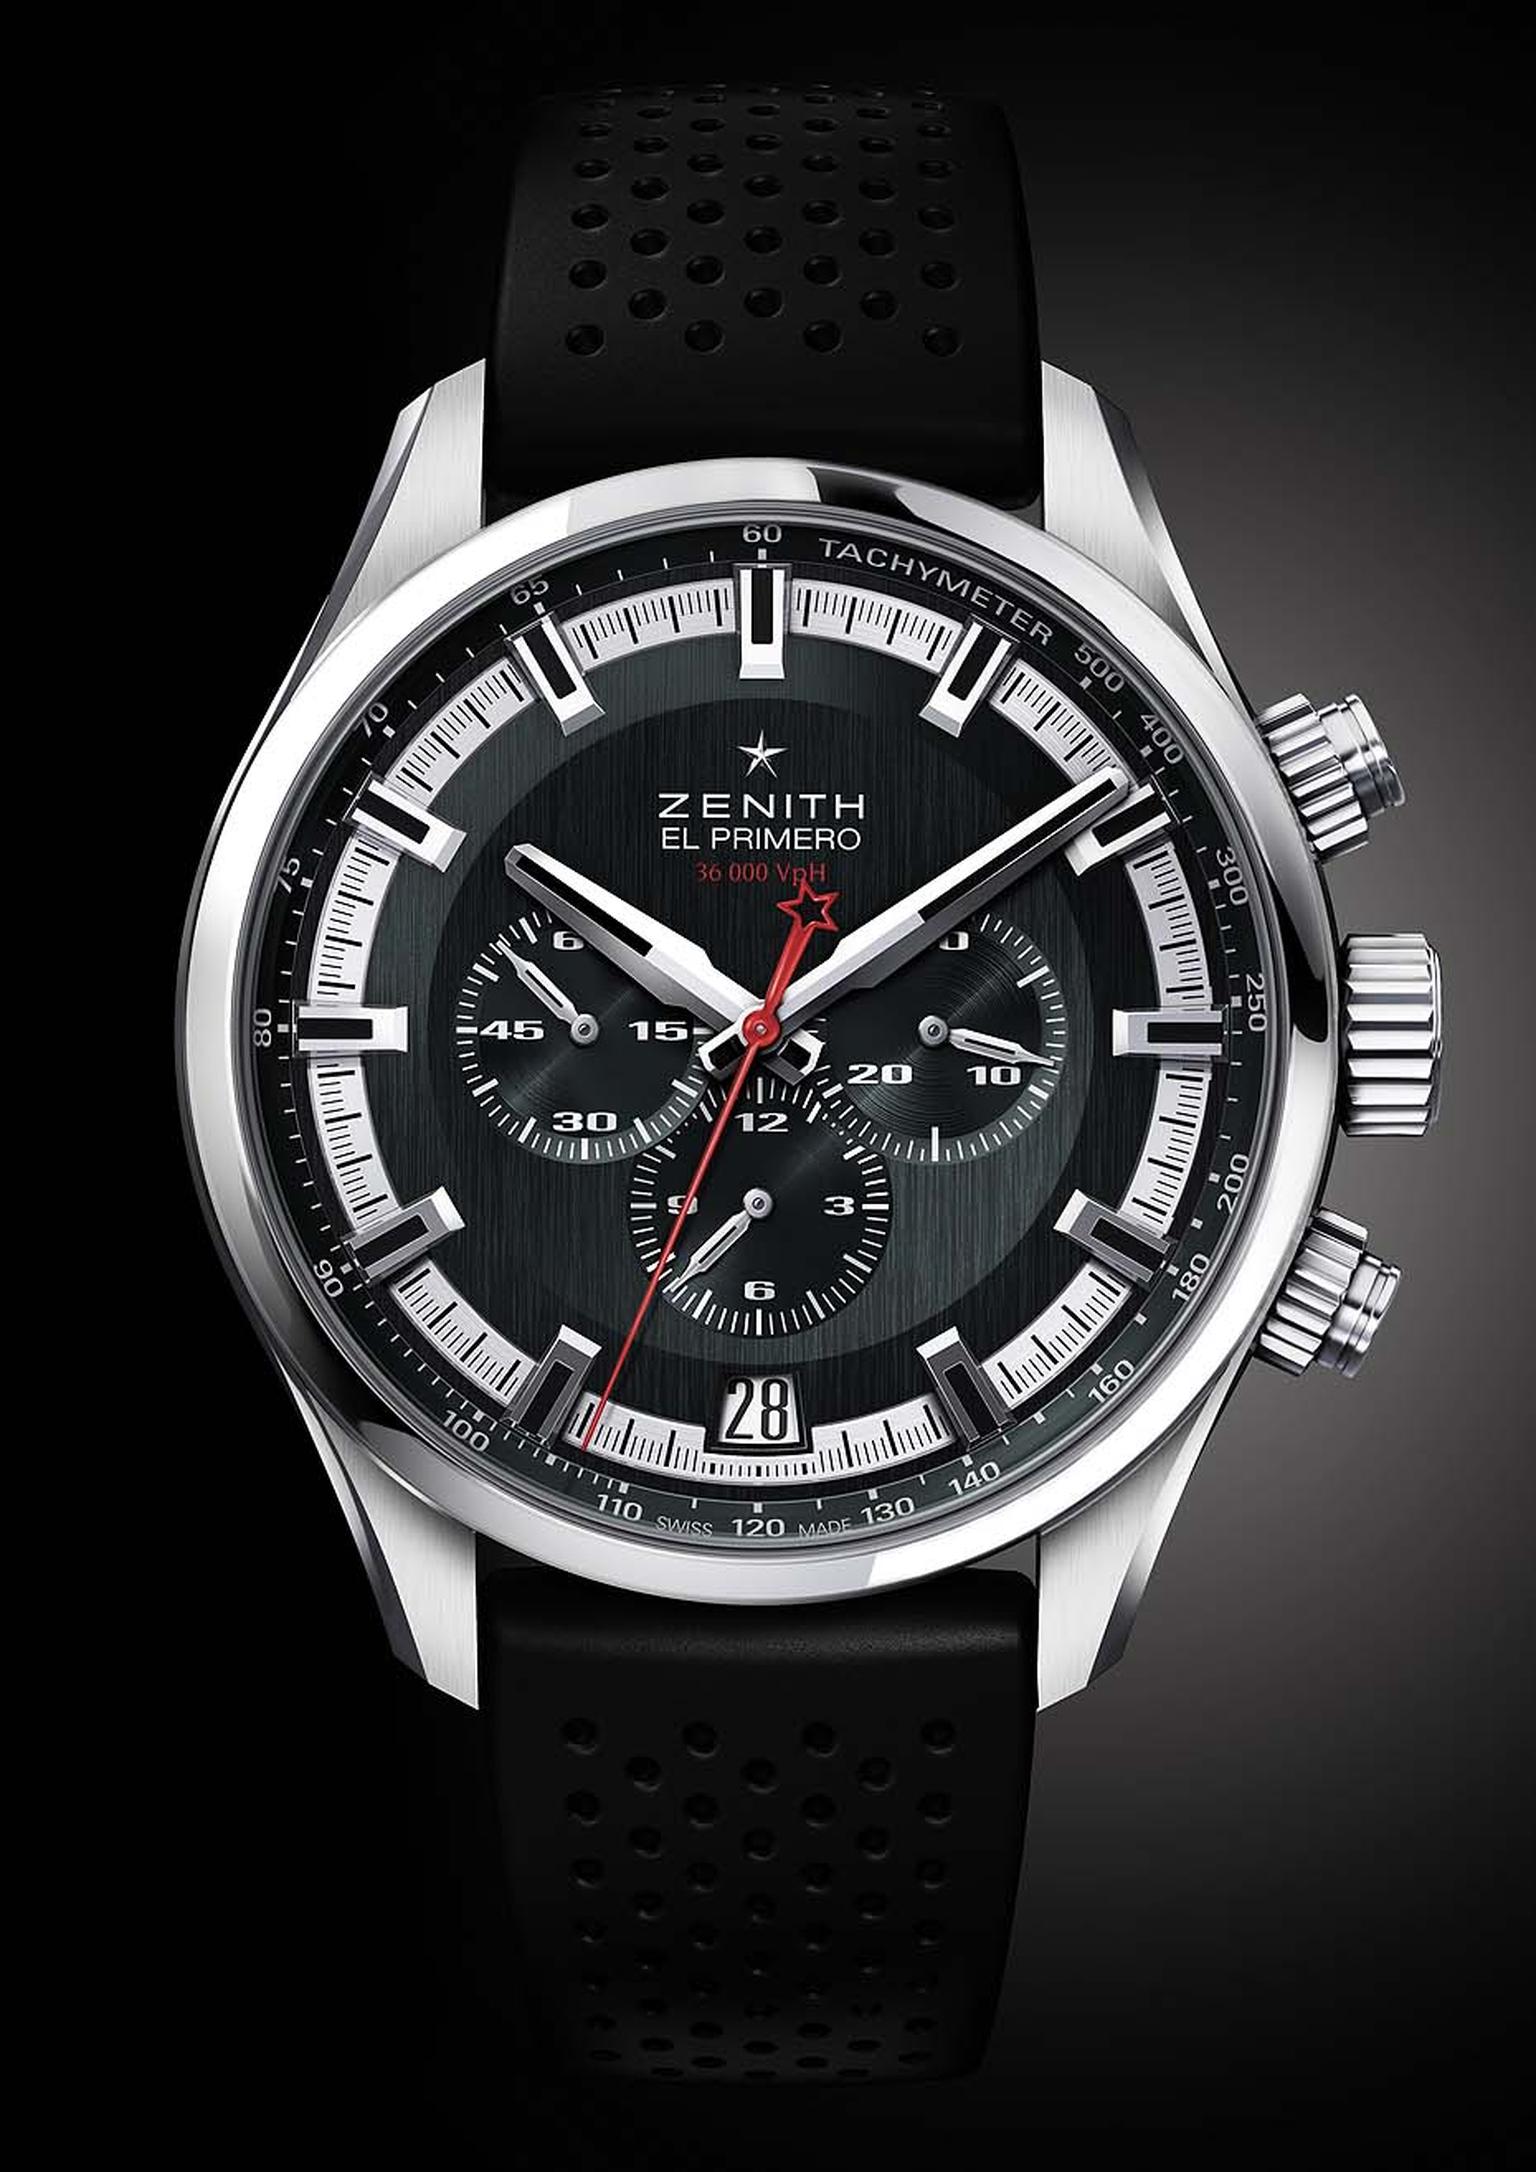 Zenith El Primero Sport men's watch with a virile slate-grey dial, broad faceted hour markers, and generous coatings of luminescence for enhanced readings. A detail Zenith watches fans will pick up on is the star emblem of the brand on the chronograph swe